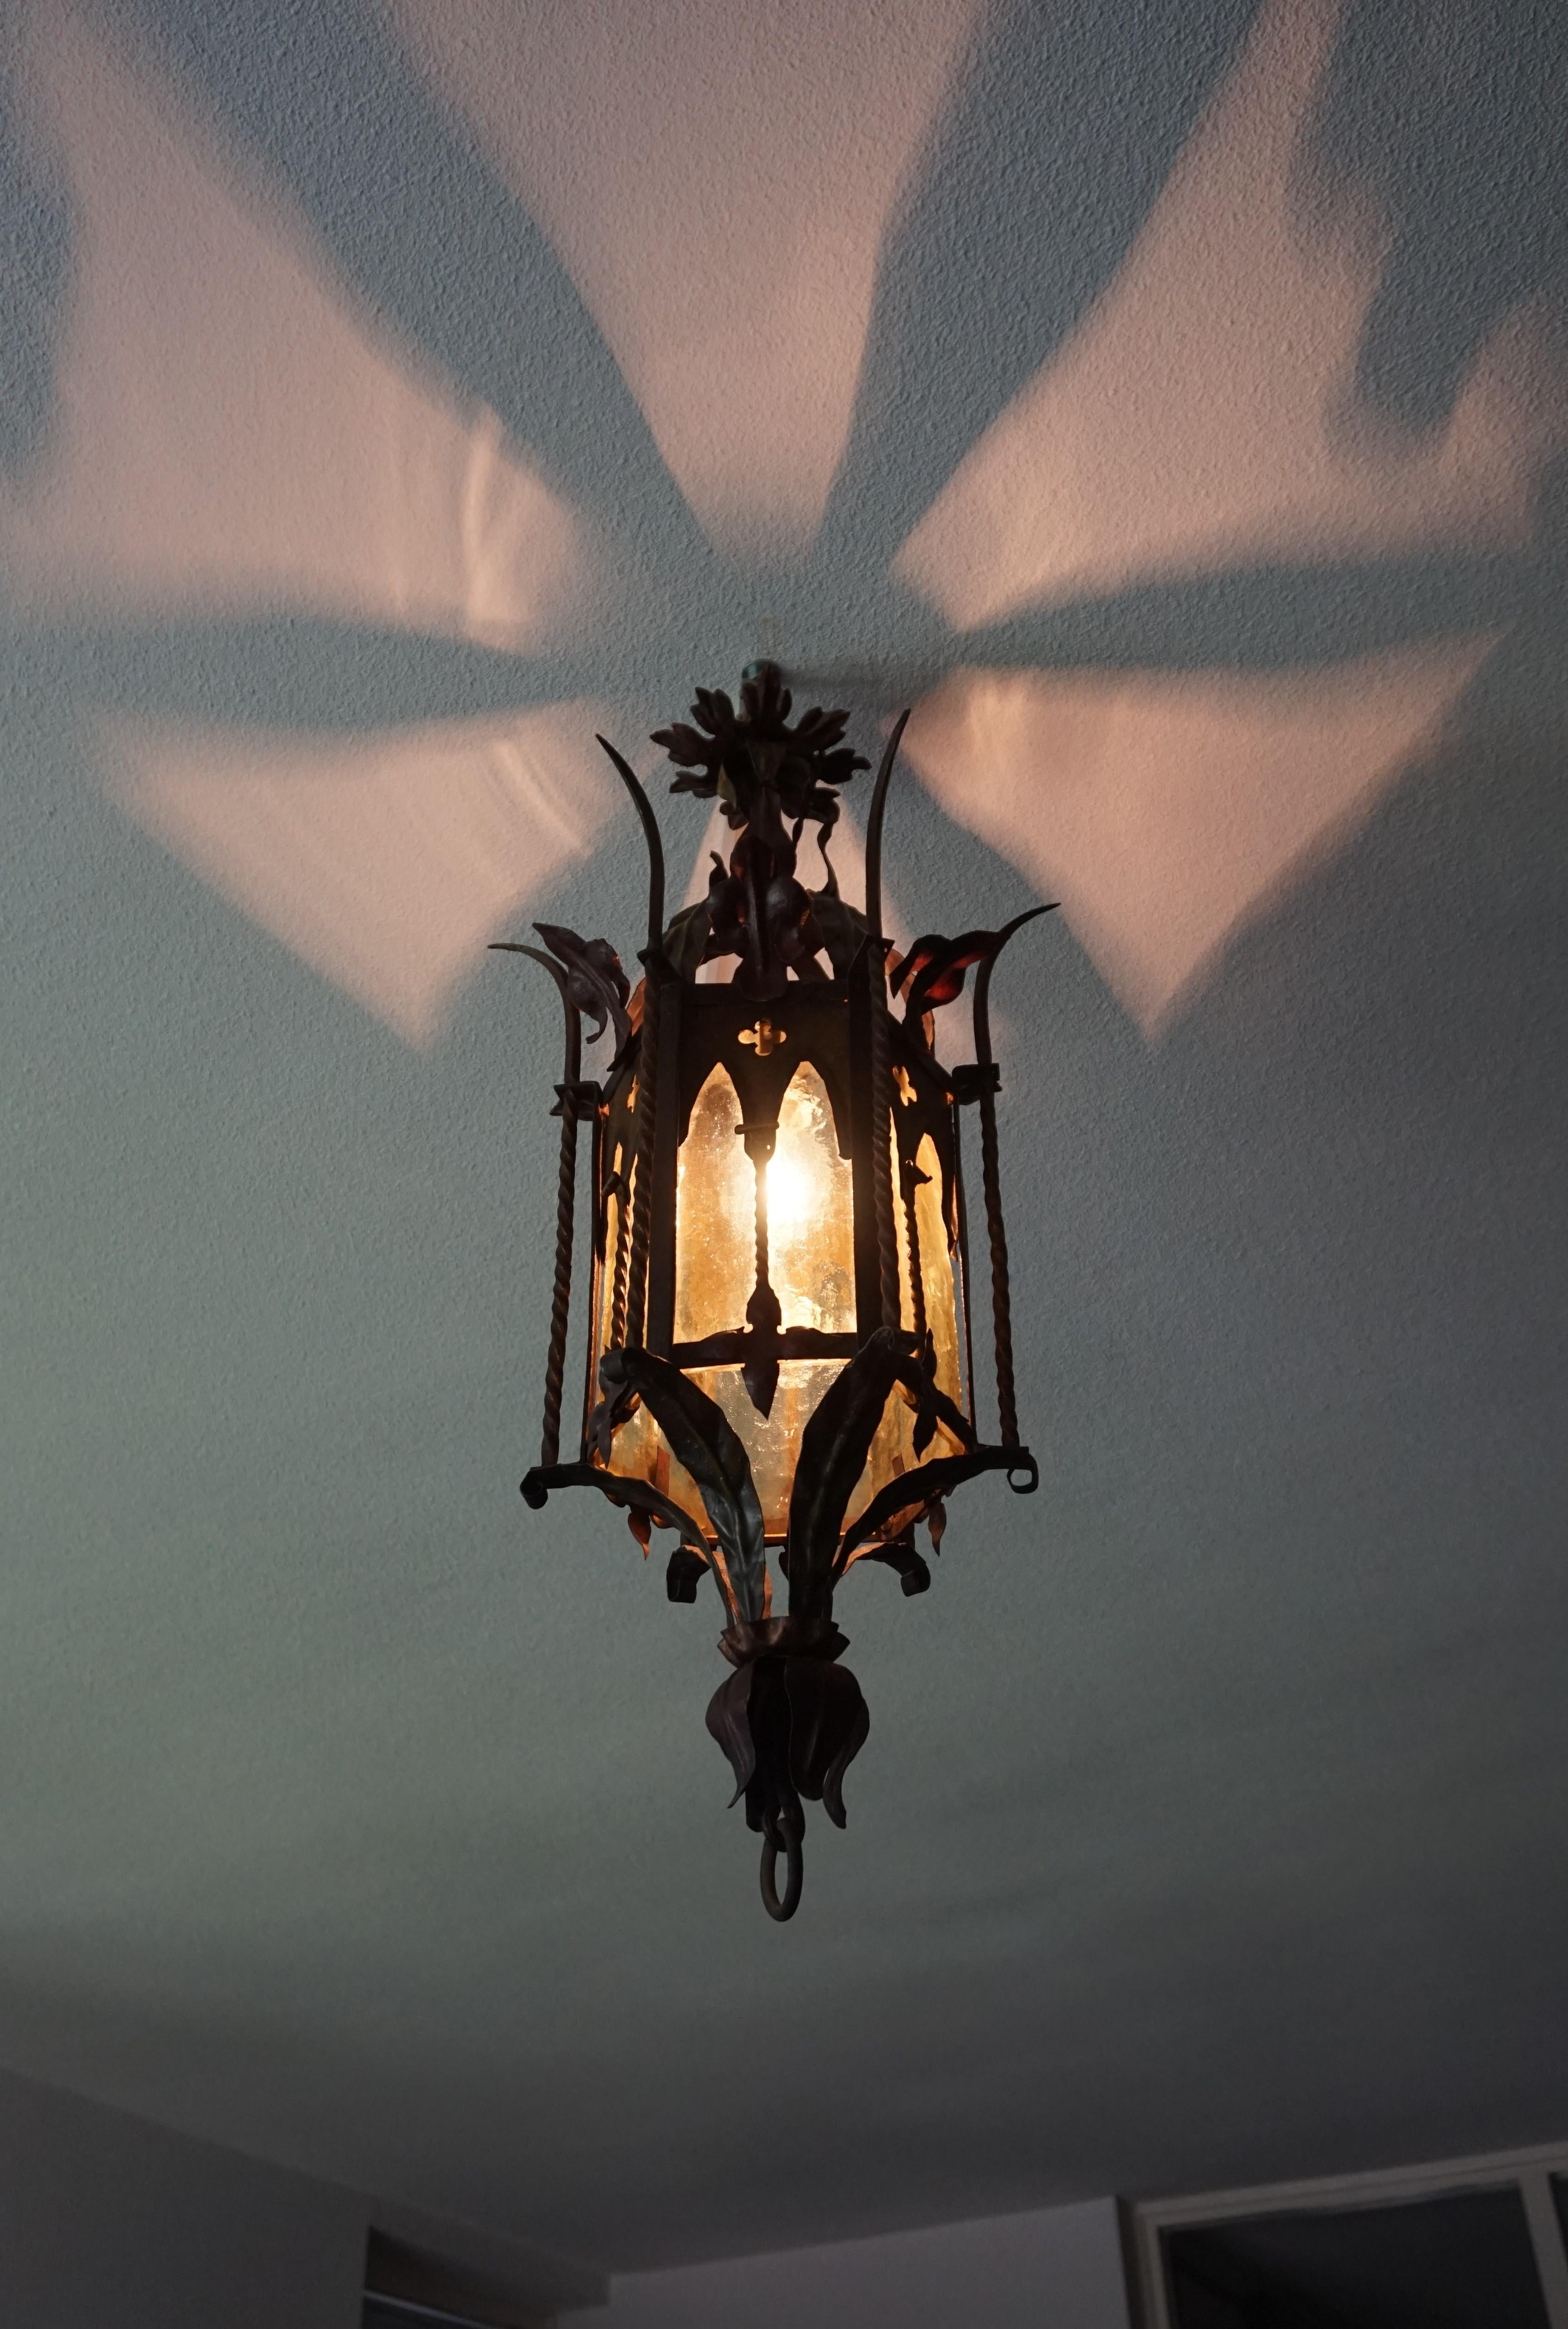 All handcrafted, hexagonal Gothic light fixture.

If you are a collector of rare and ancient looking Gothic antiques then this good size and one of a kind pendant could be flying your way soon. With antique light fixtures as one of our specialties,